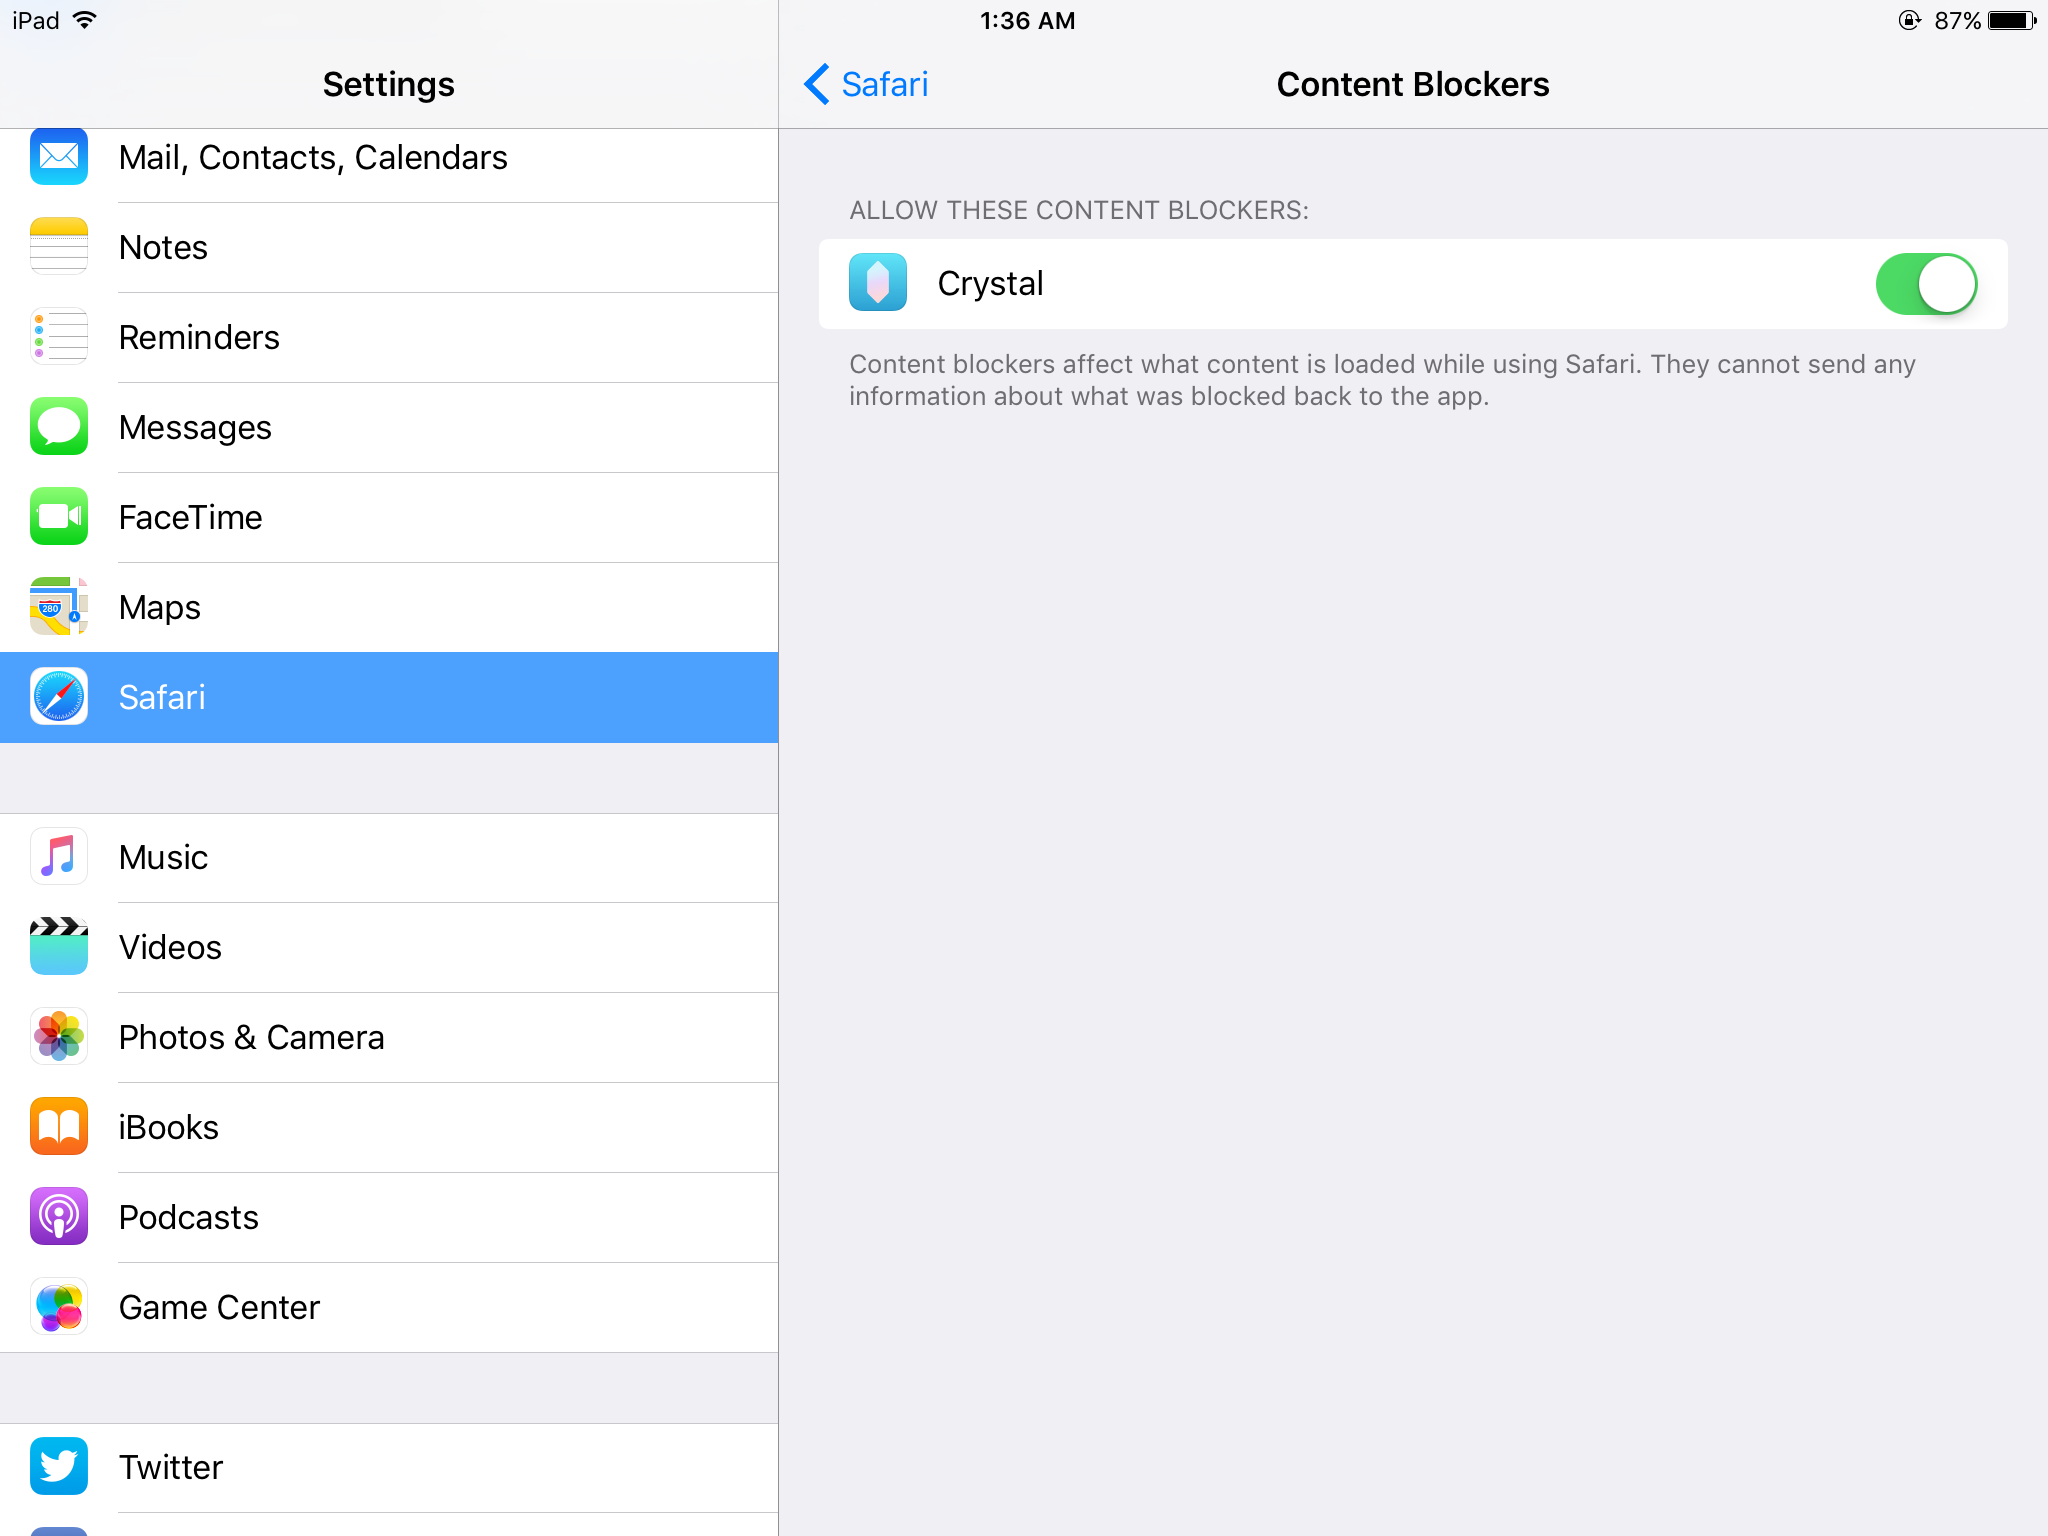 Enable Content Blocking in iOS 9